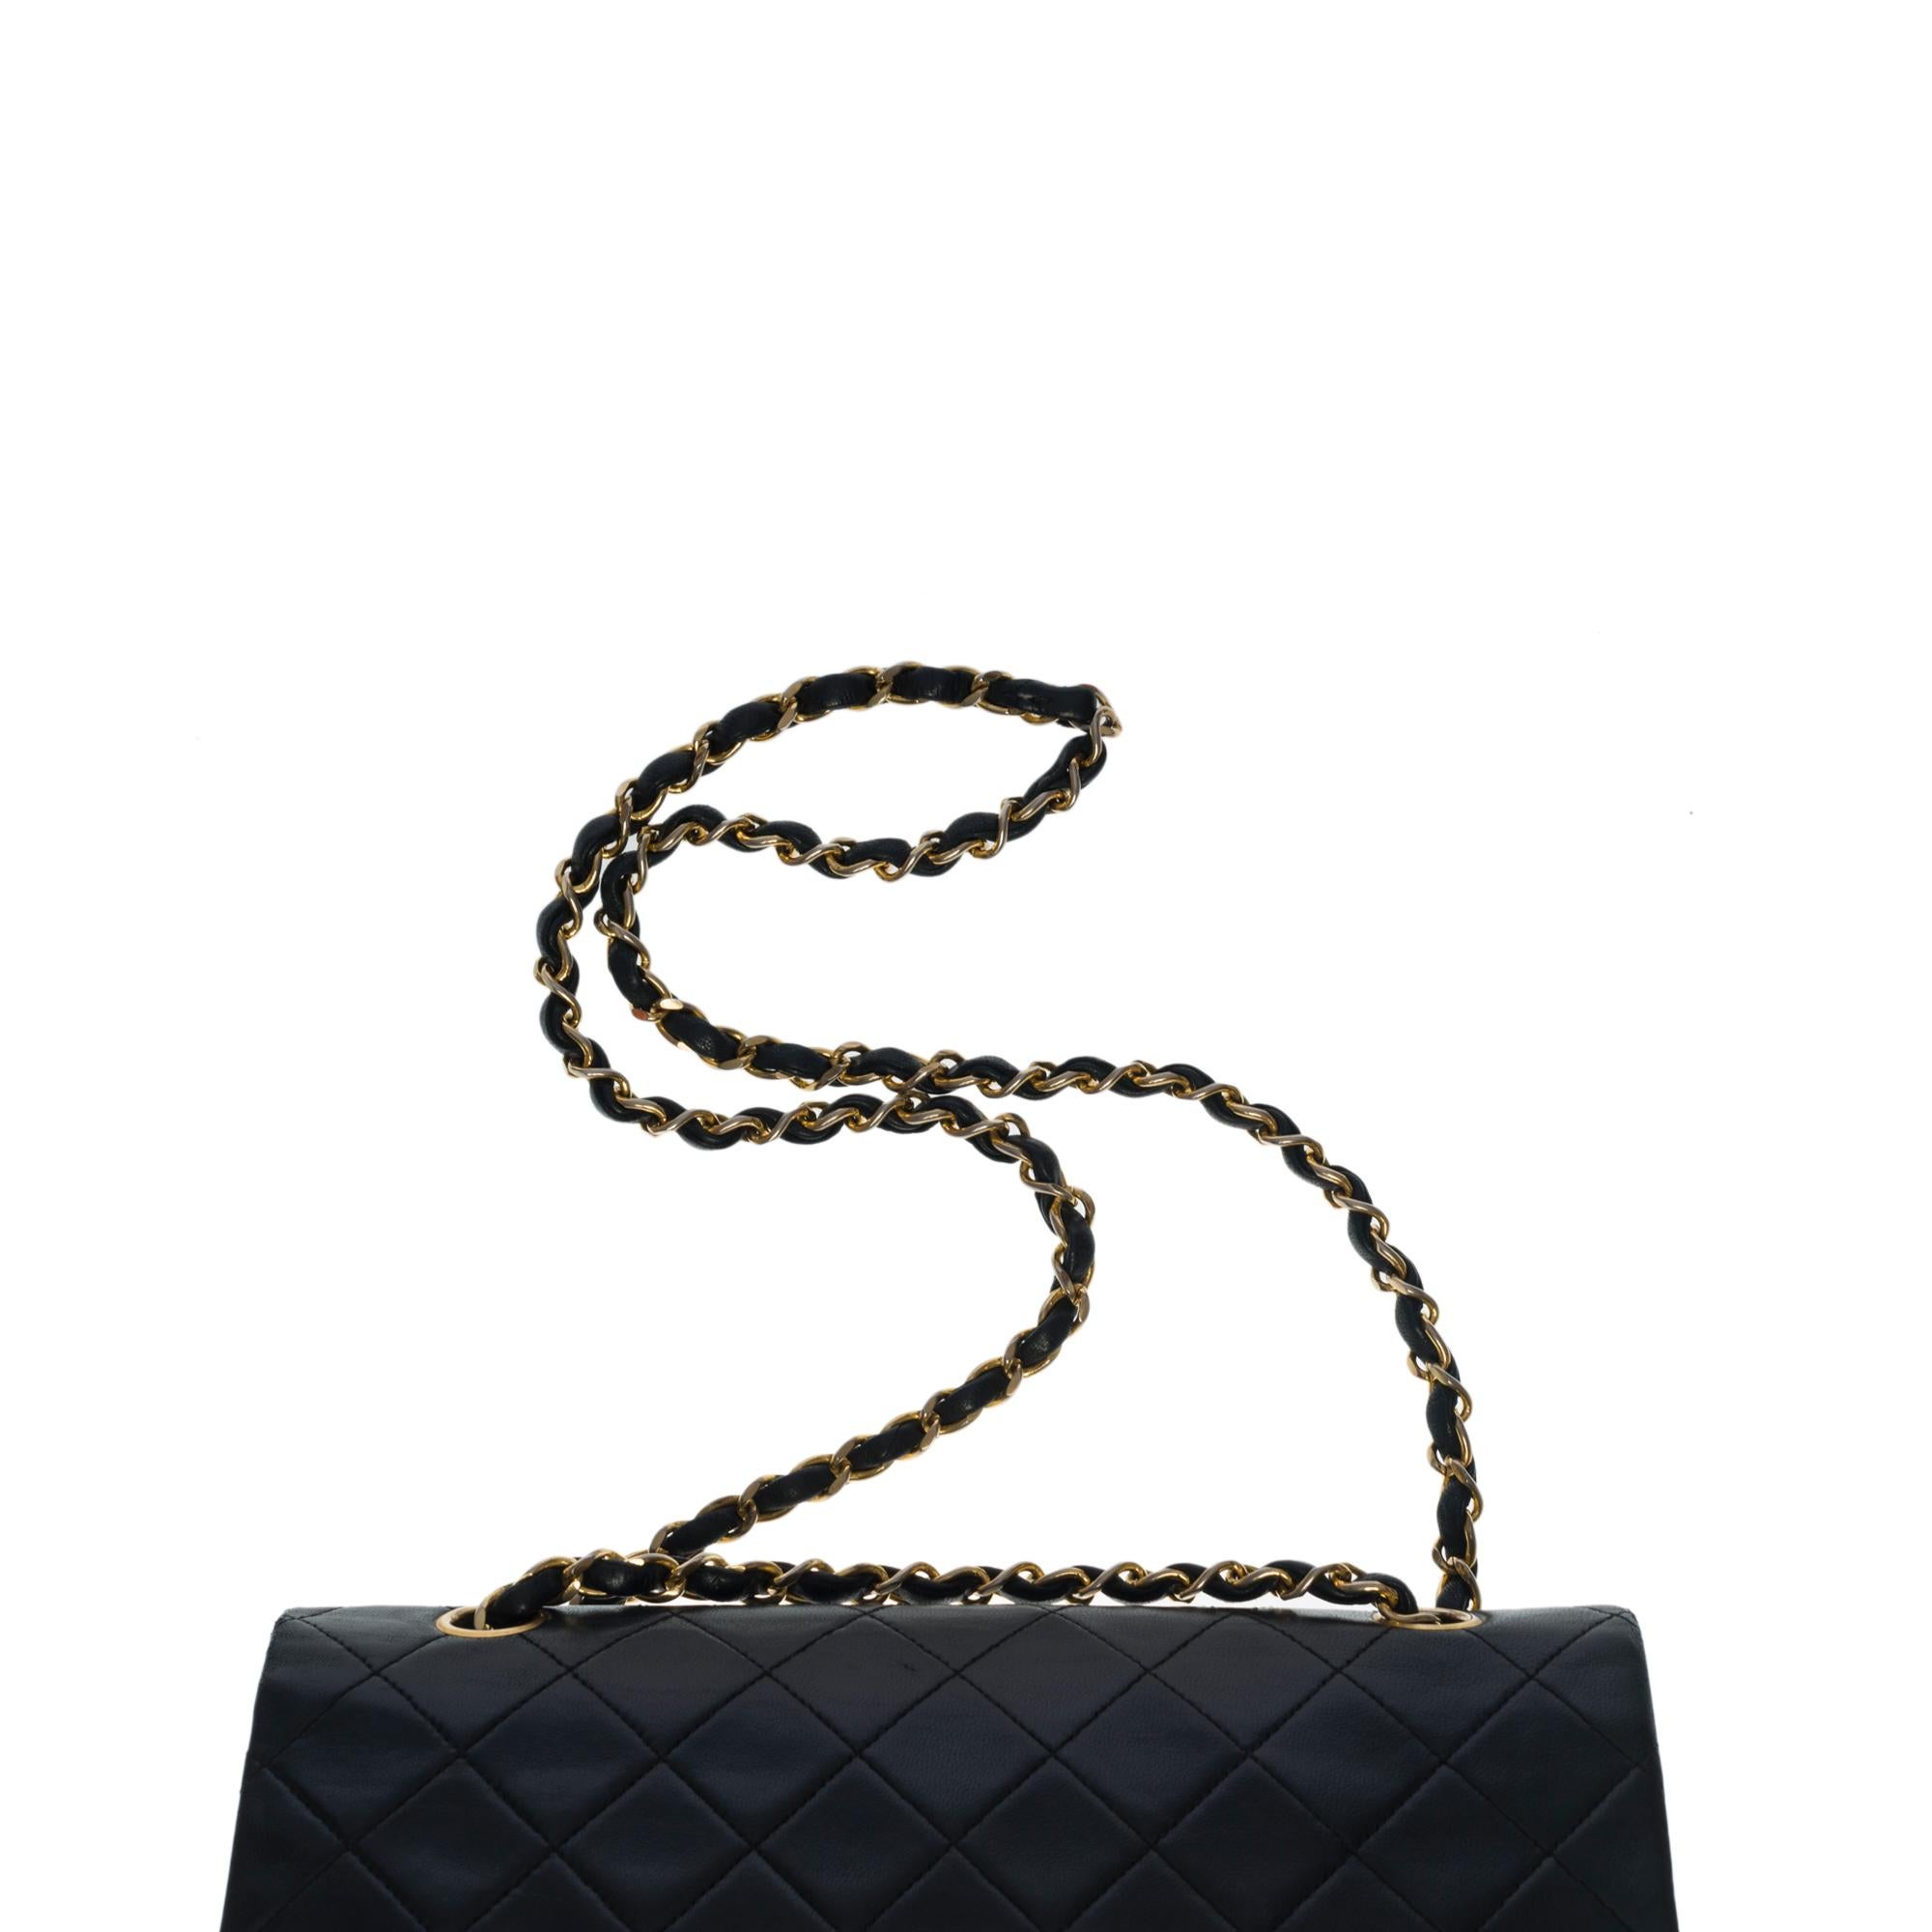 Chanel Timeless medium double flap shoulder bag in black quilted lambskin, GHW For Sale 4